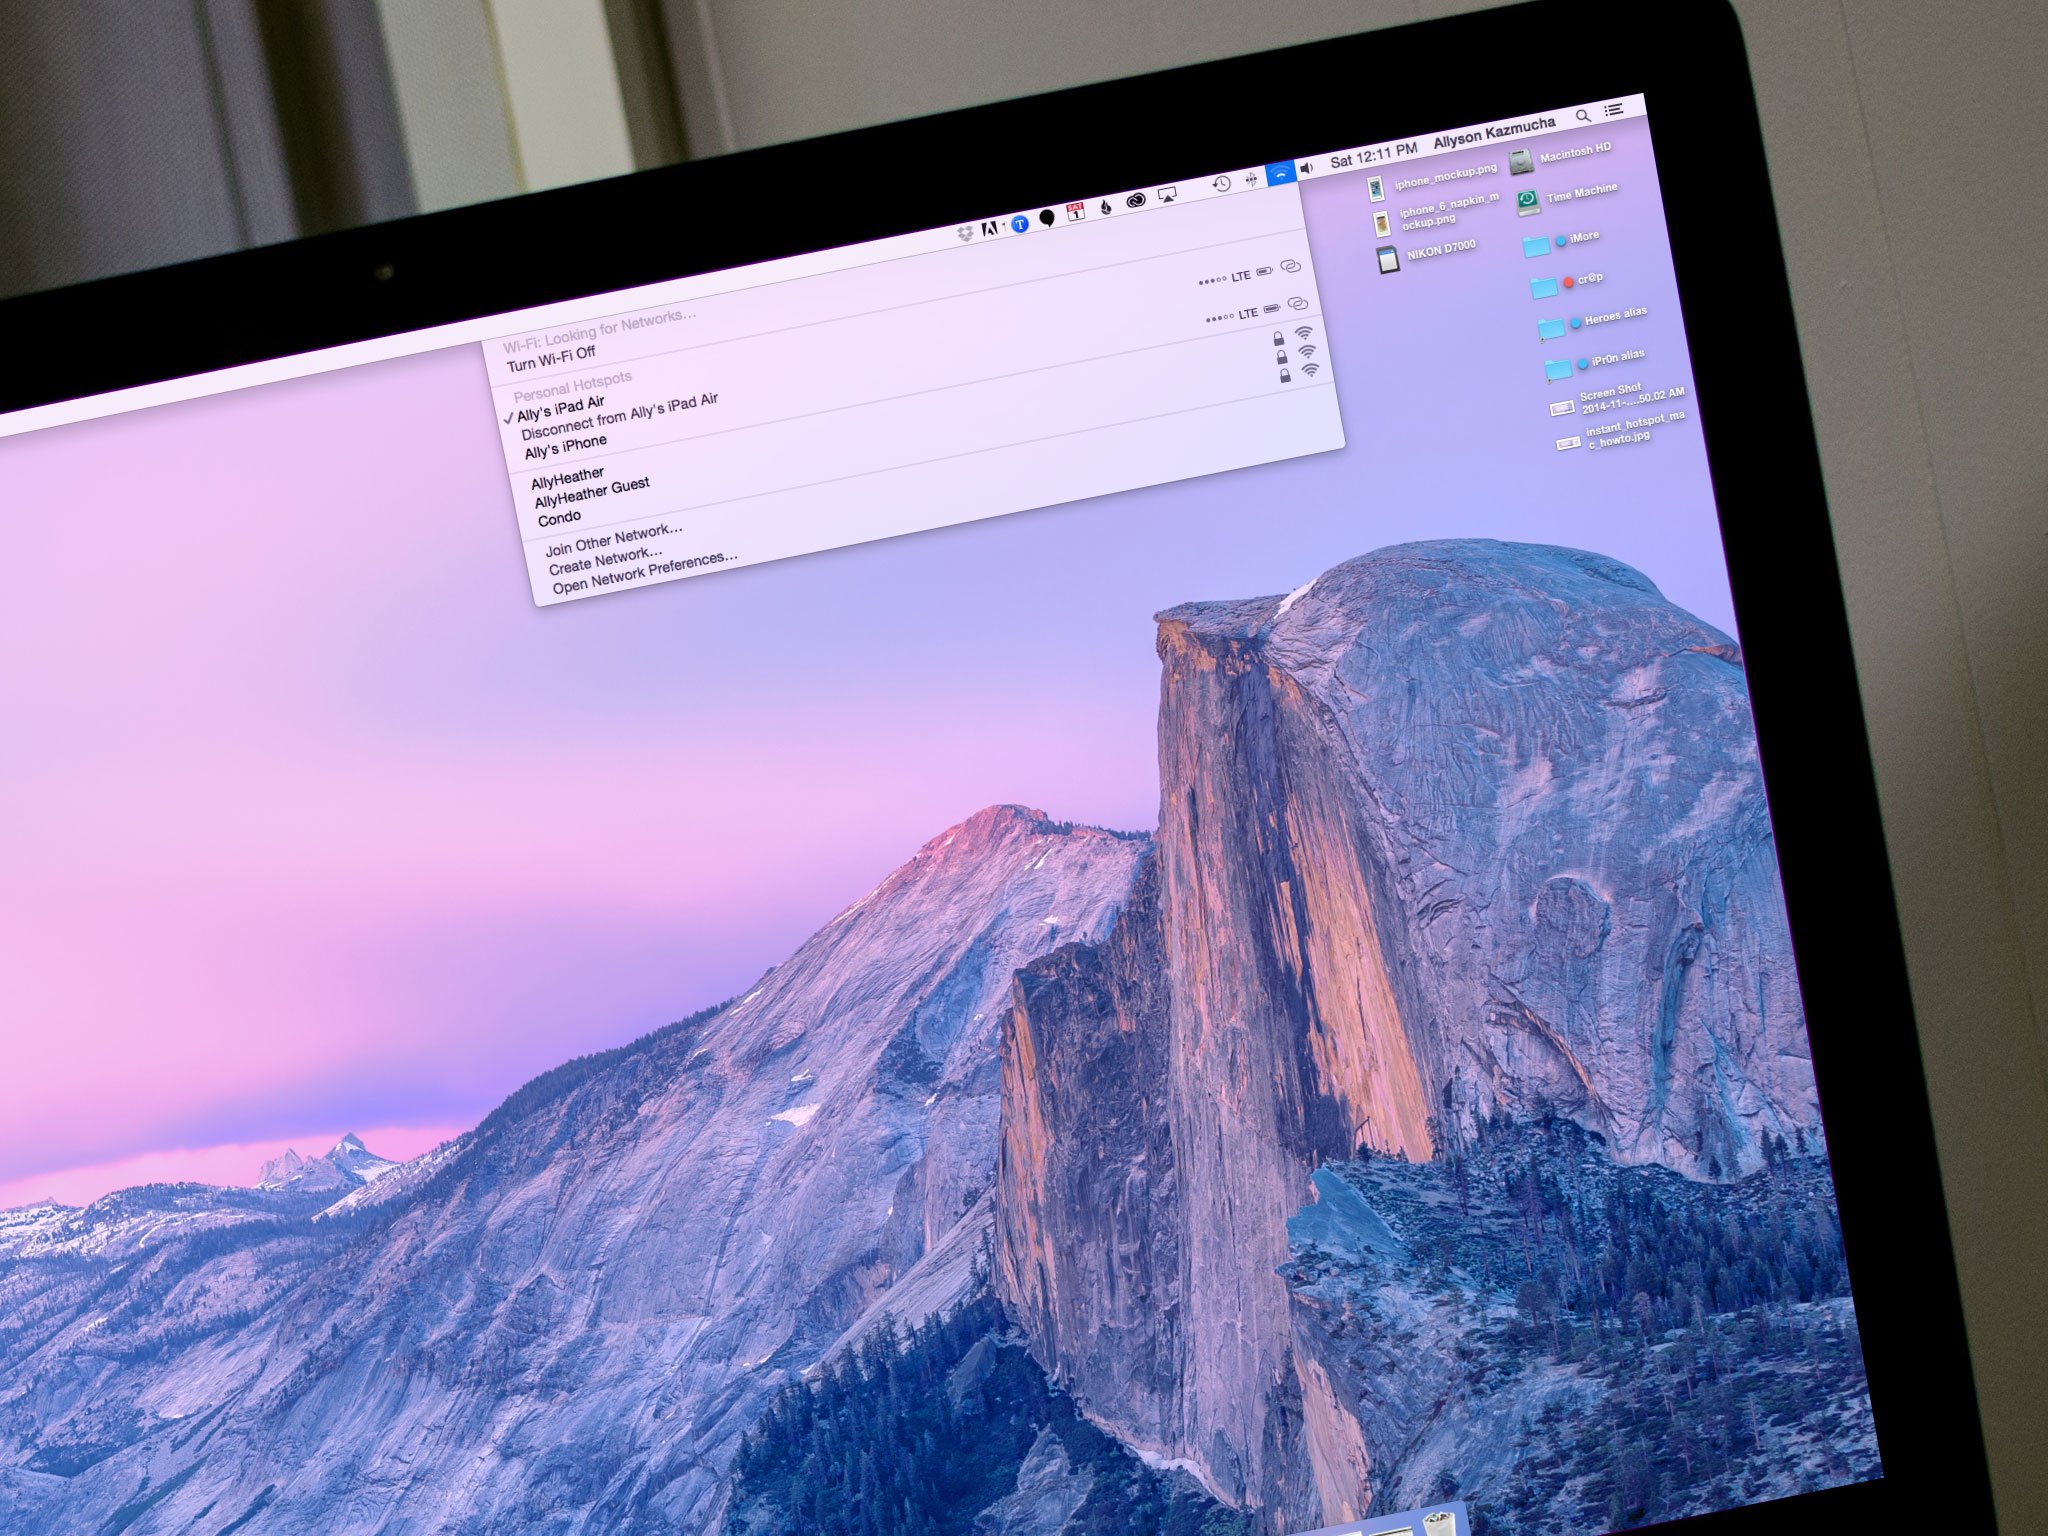 How to connect to Instant Hotspot on your Mac